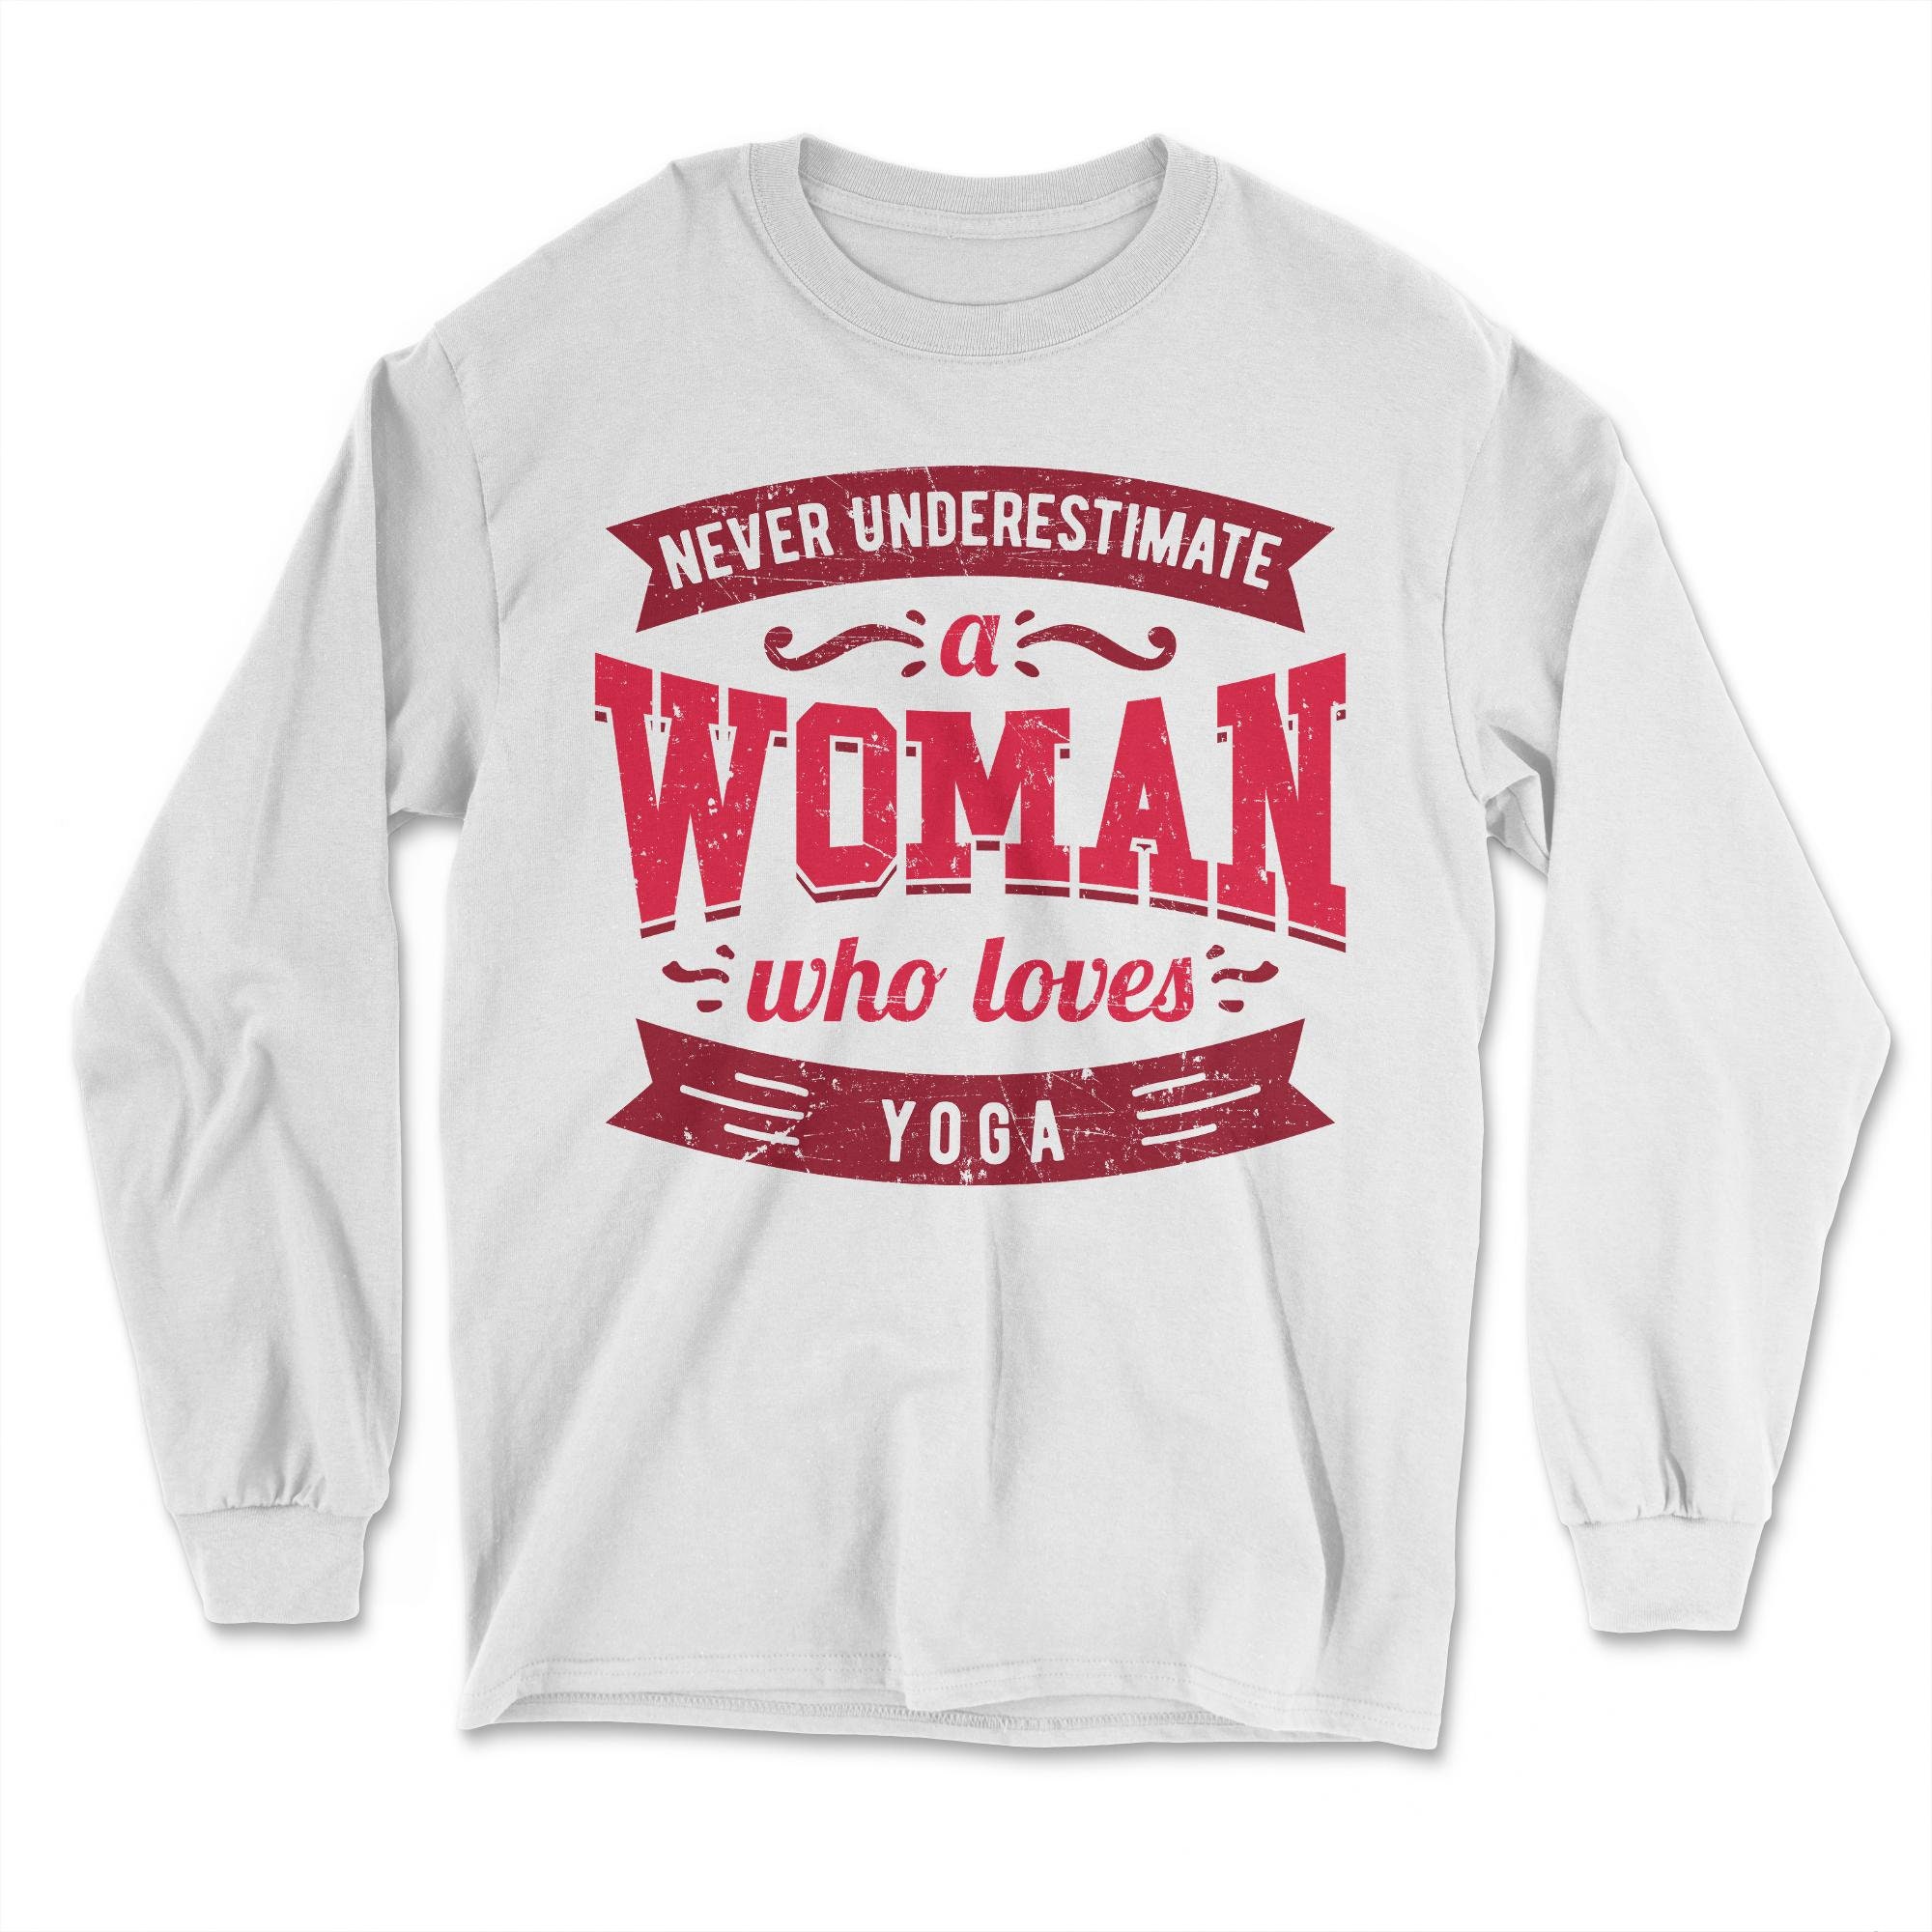 Never Underestimate a Woman Who Loves Yoga Shirt Great Saying Gift